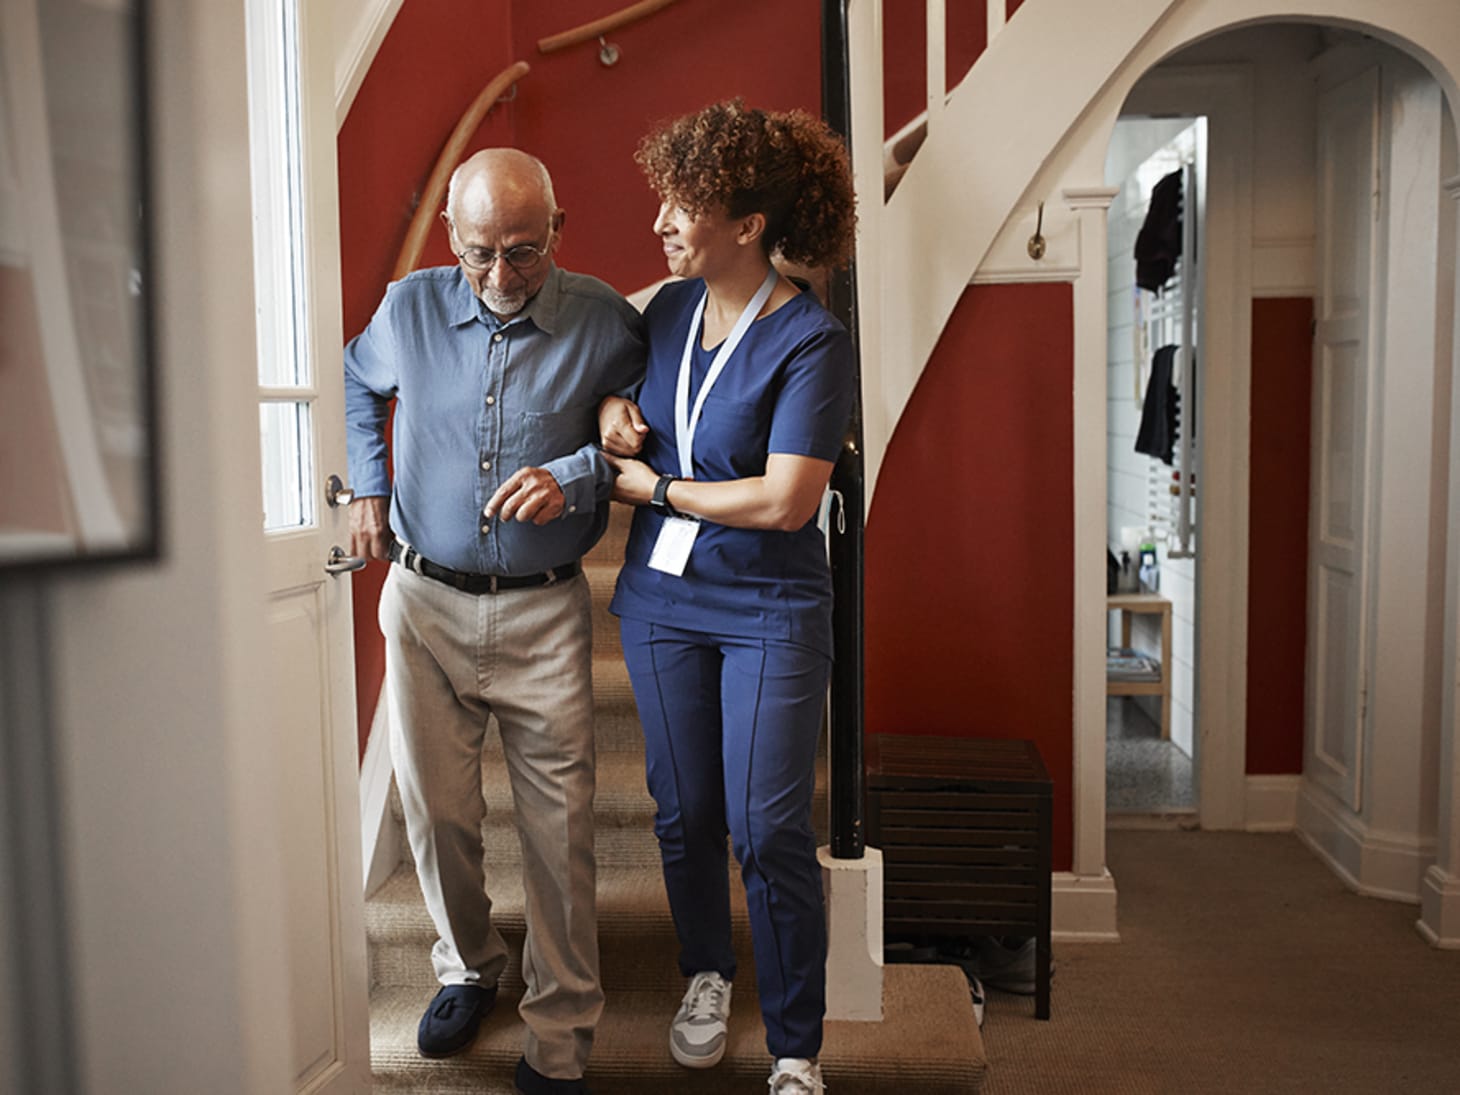 female home aid supporting an elderly man walking down stairs 